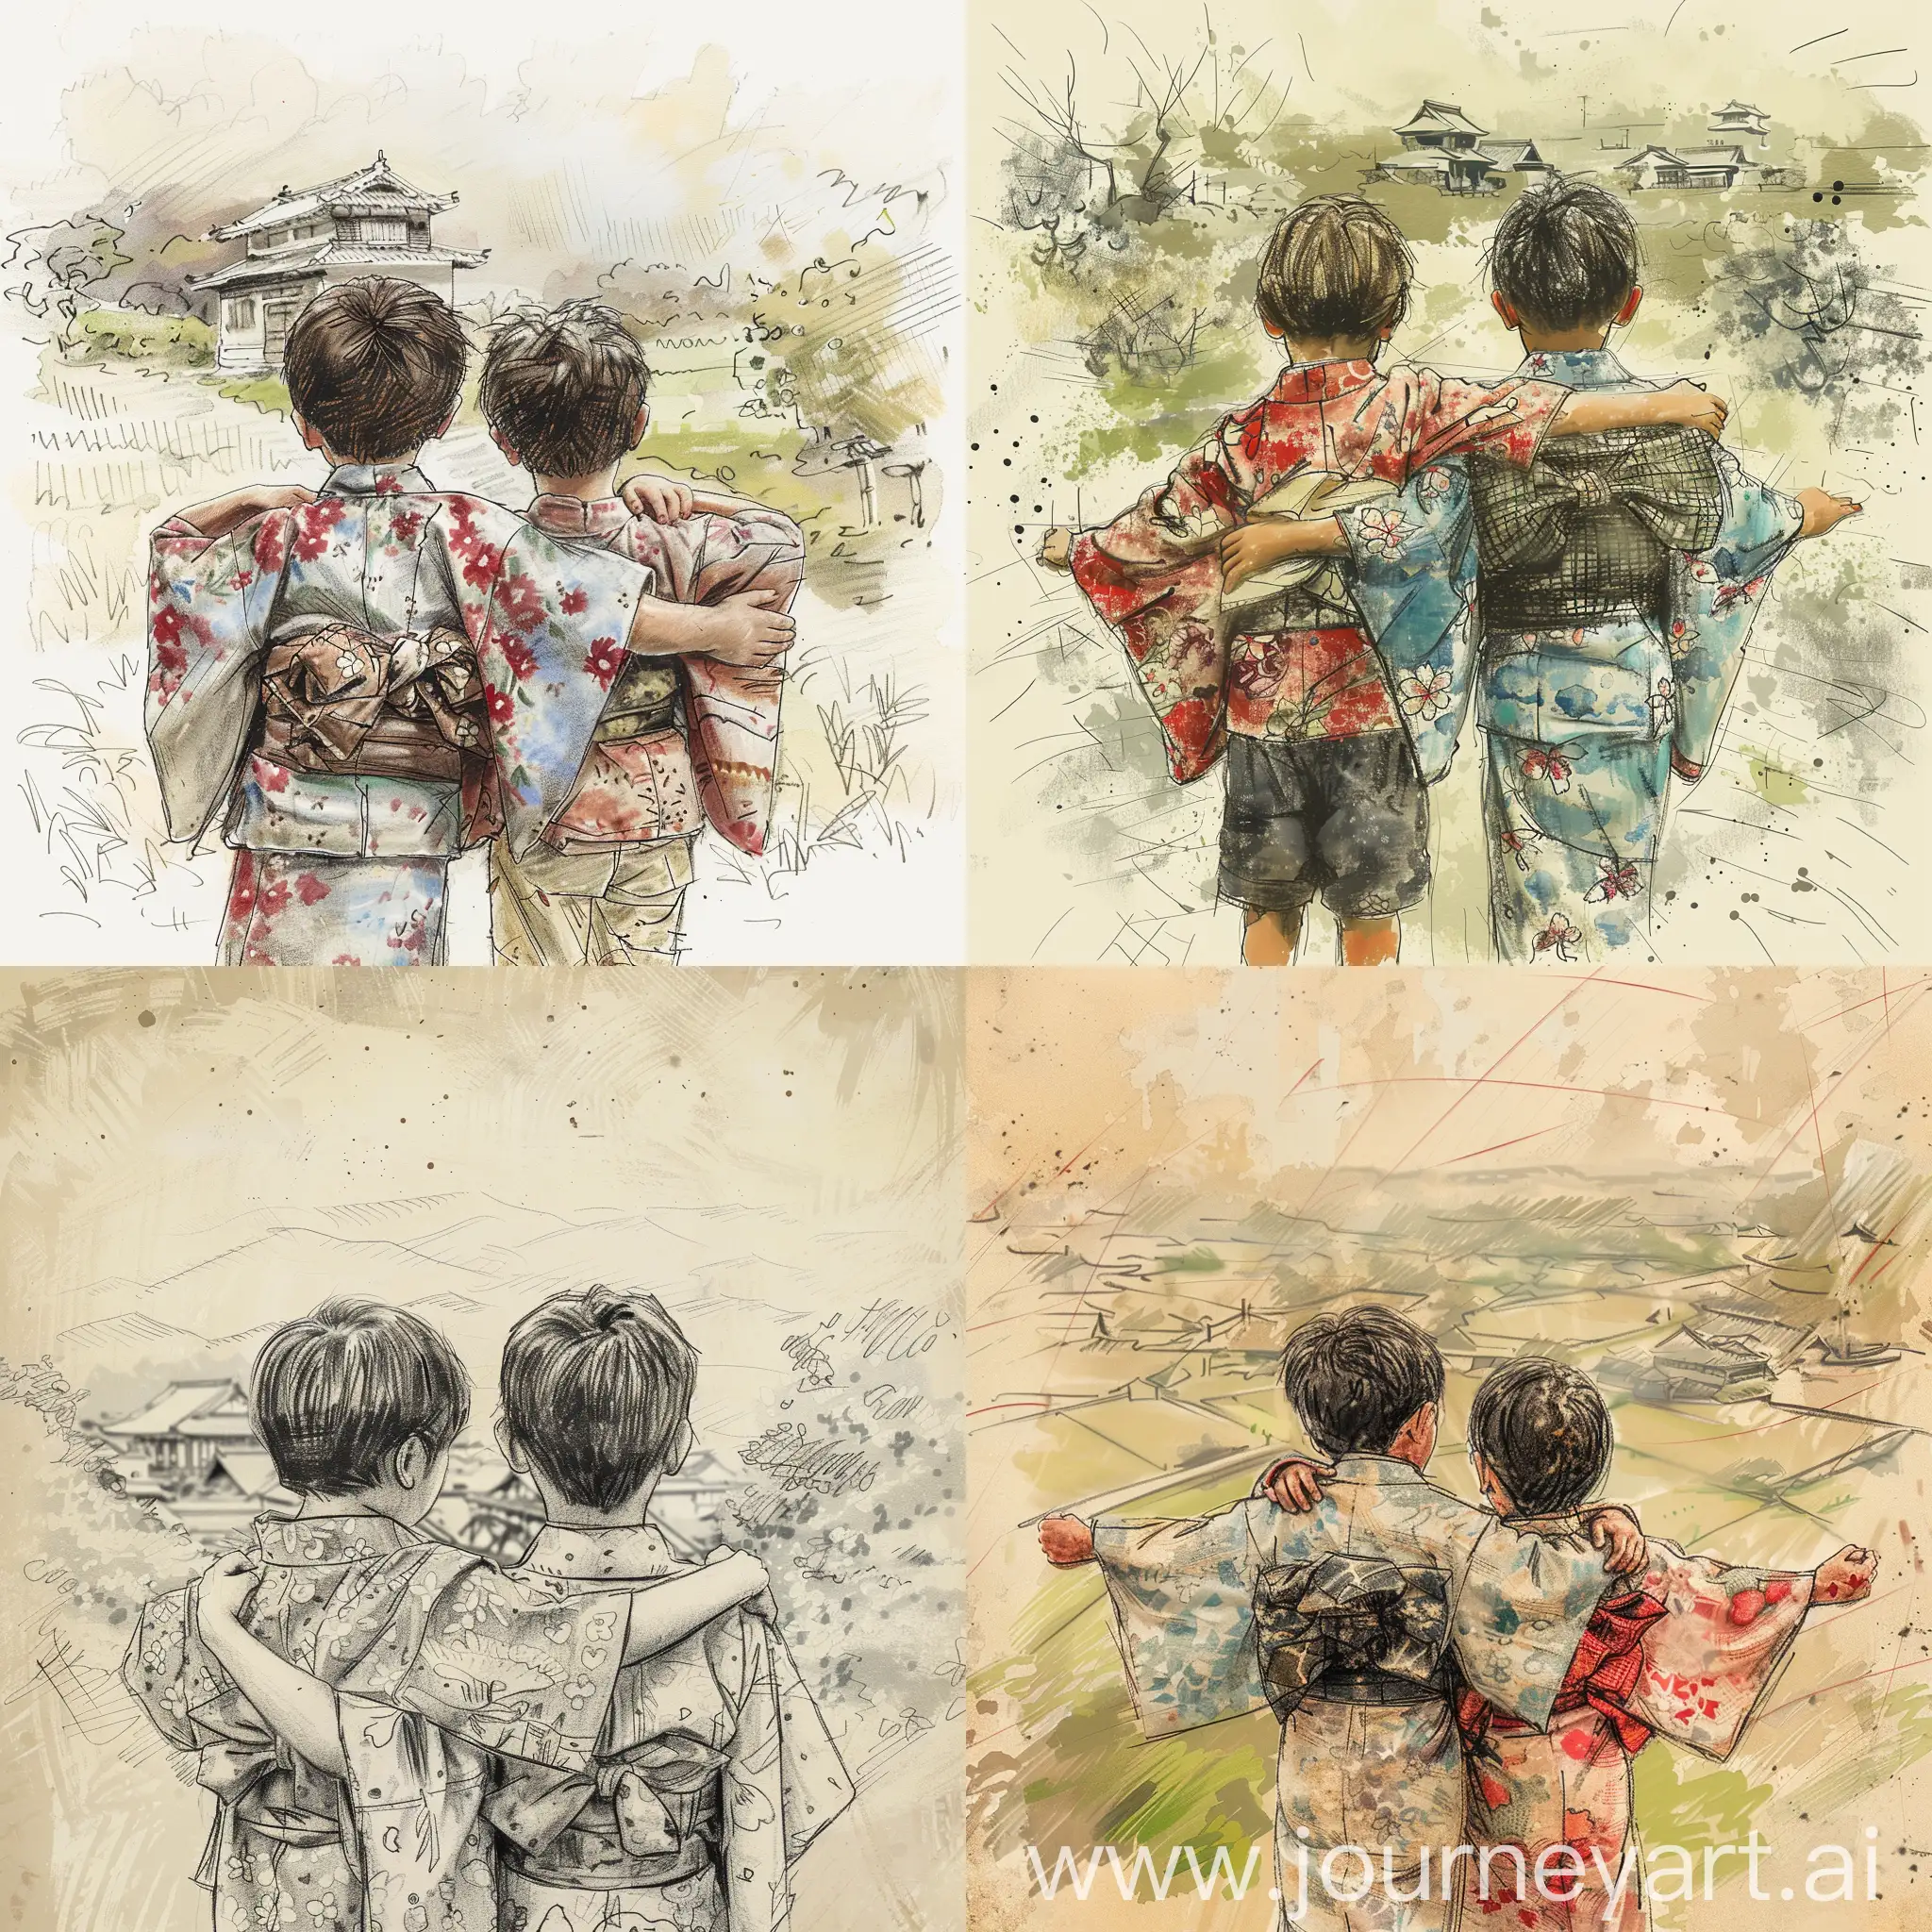 Japanese-Children-in-Traditional-Kimonos-Embrace-Amidst-Whimsical-Countryside-Sketch